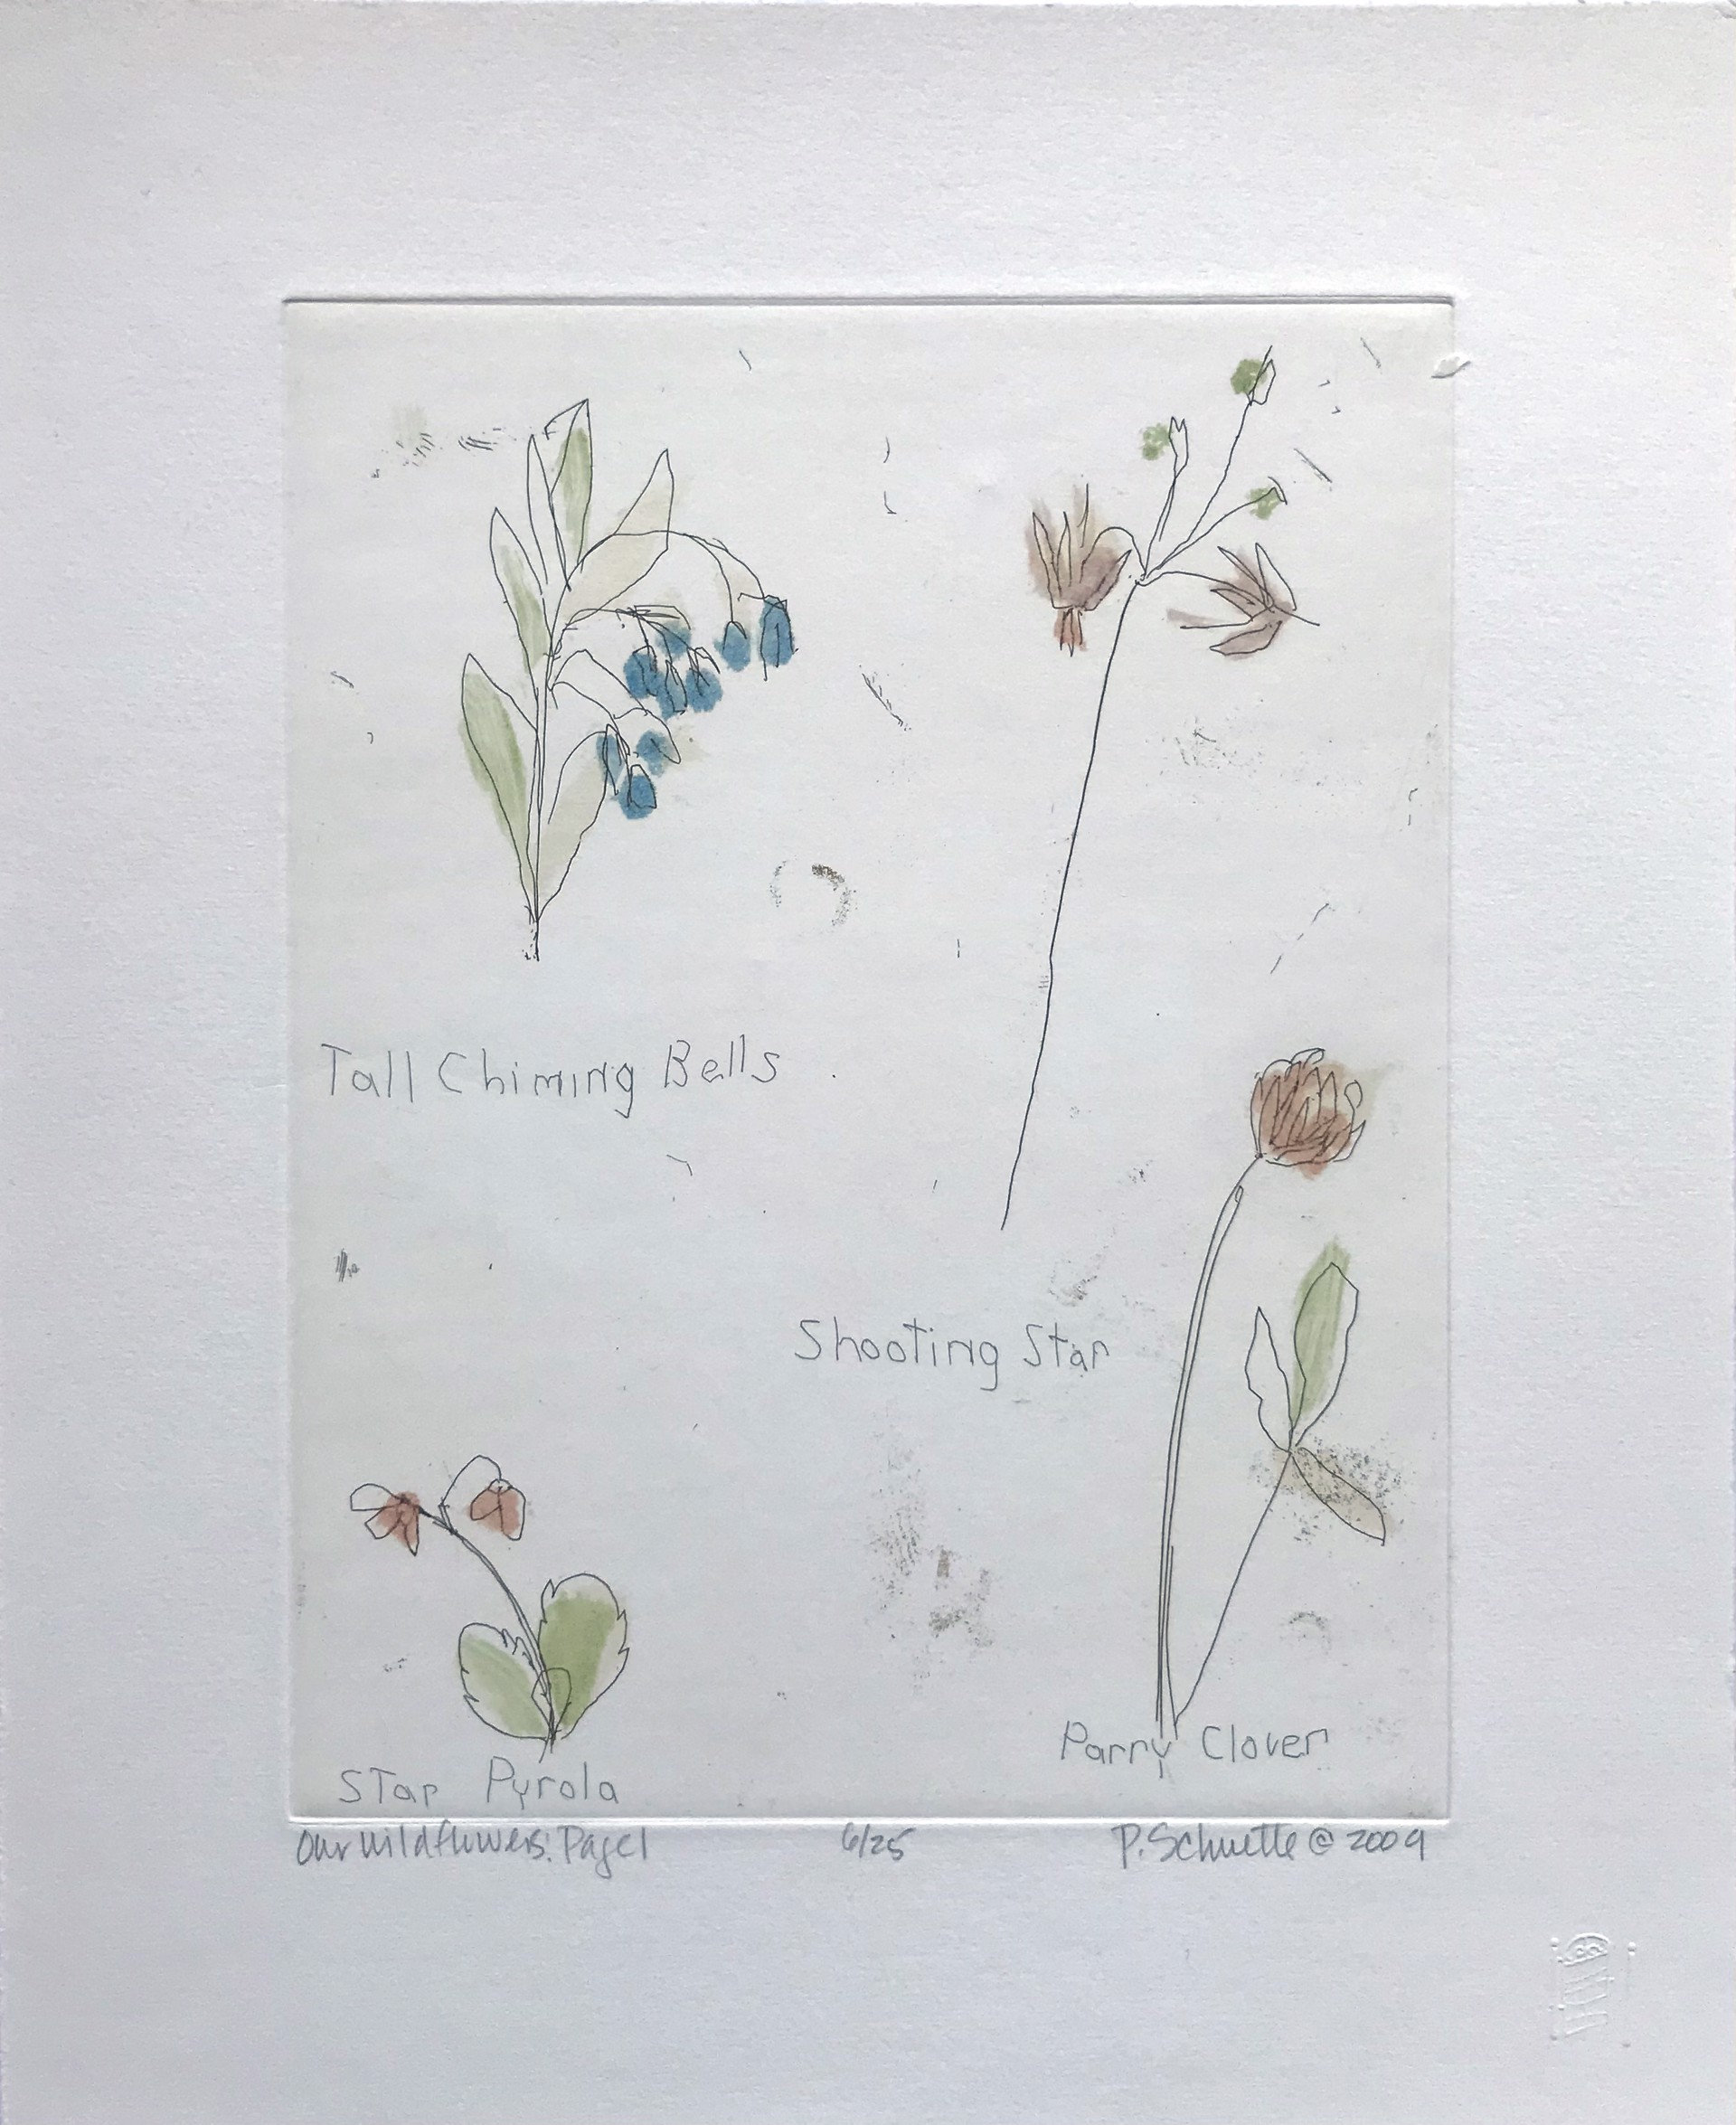 Our Wildflowers - Page 1 by Paula Schuette Kraemer